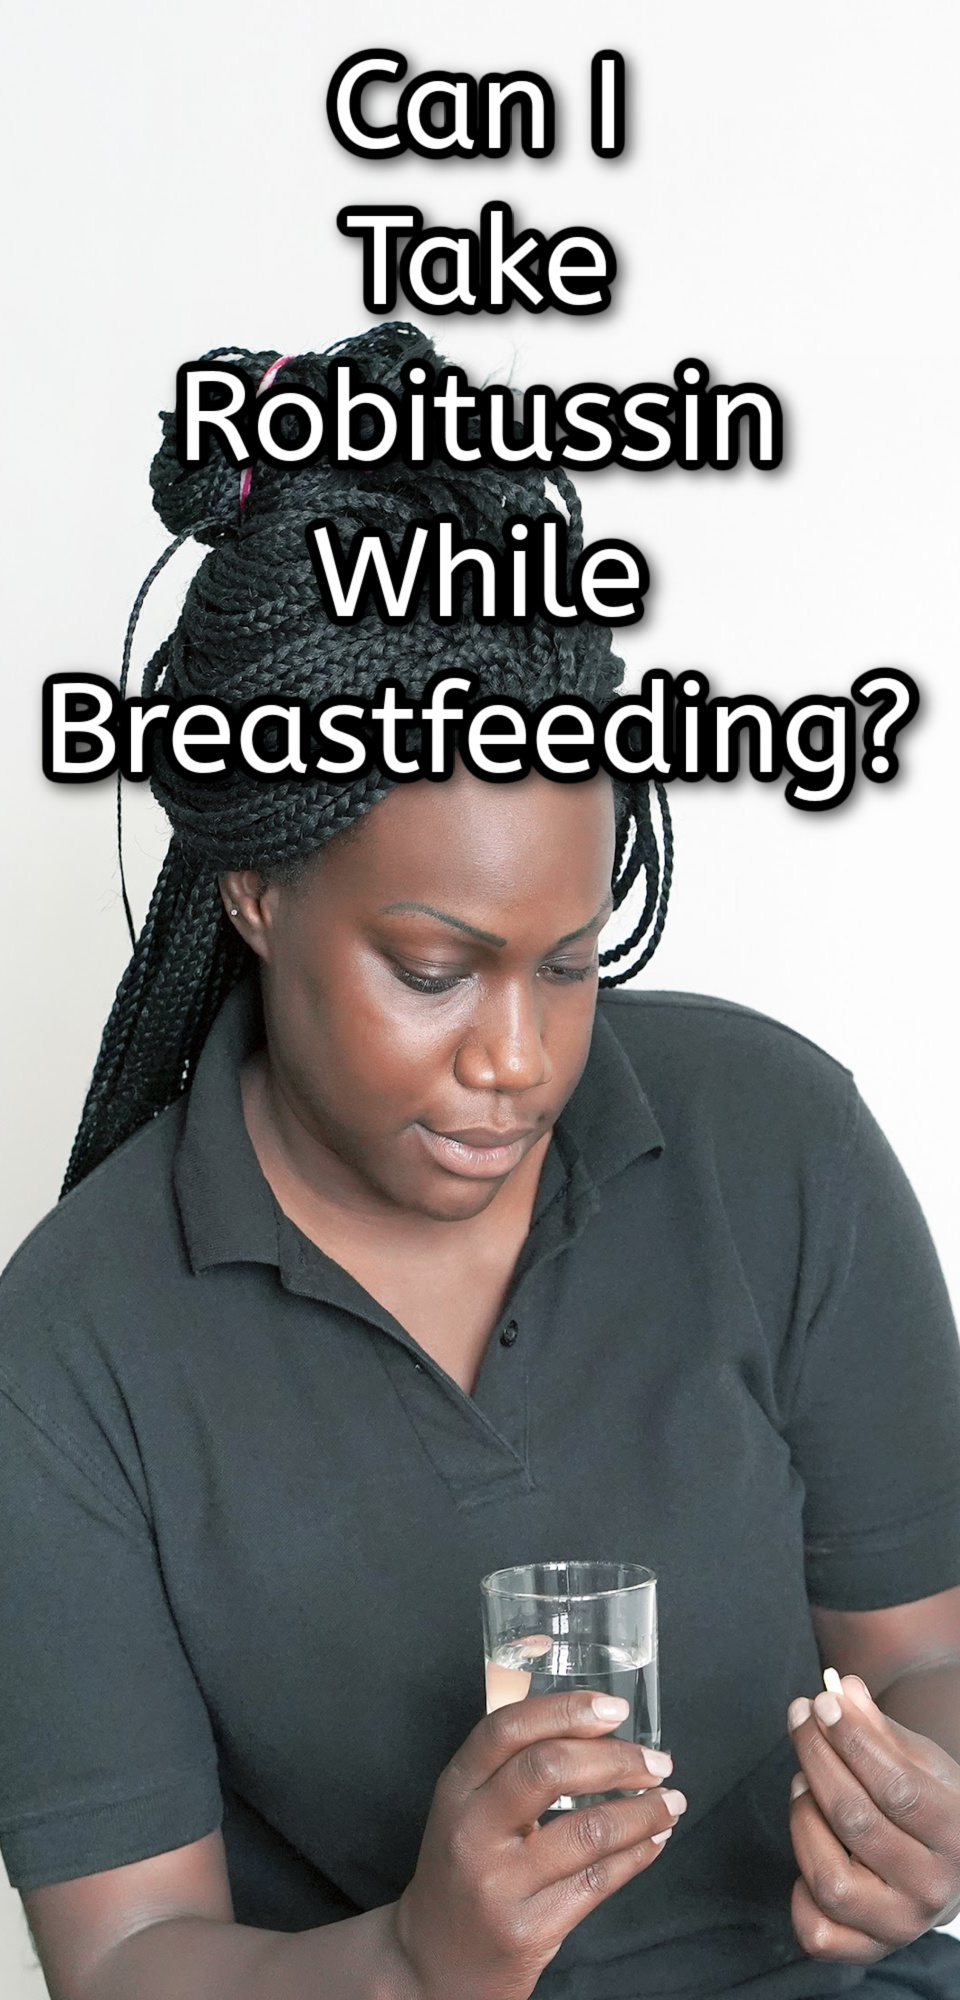 Can I Take Robitussin While Breastfeeding?